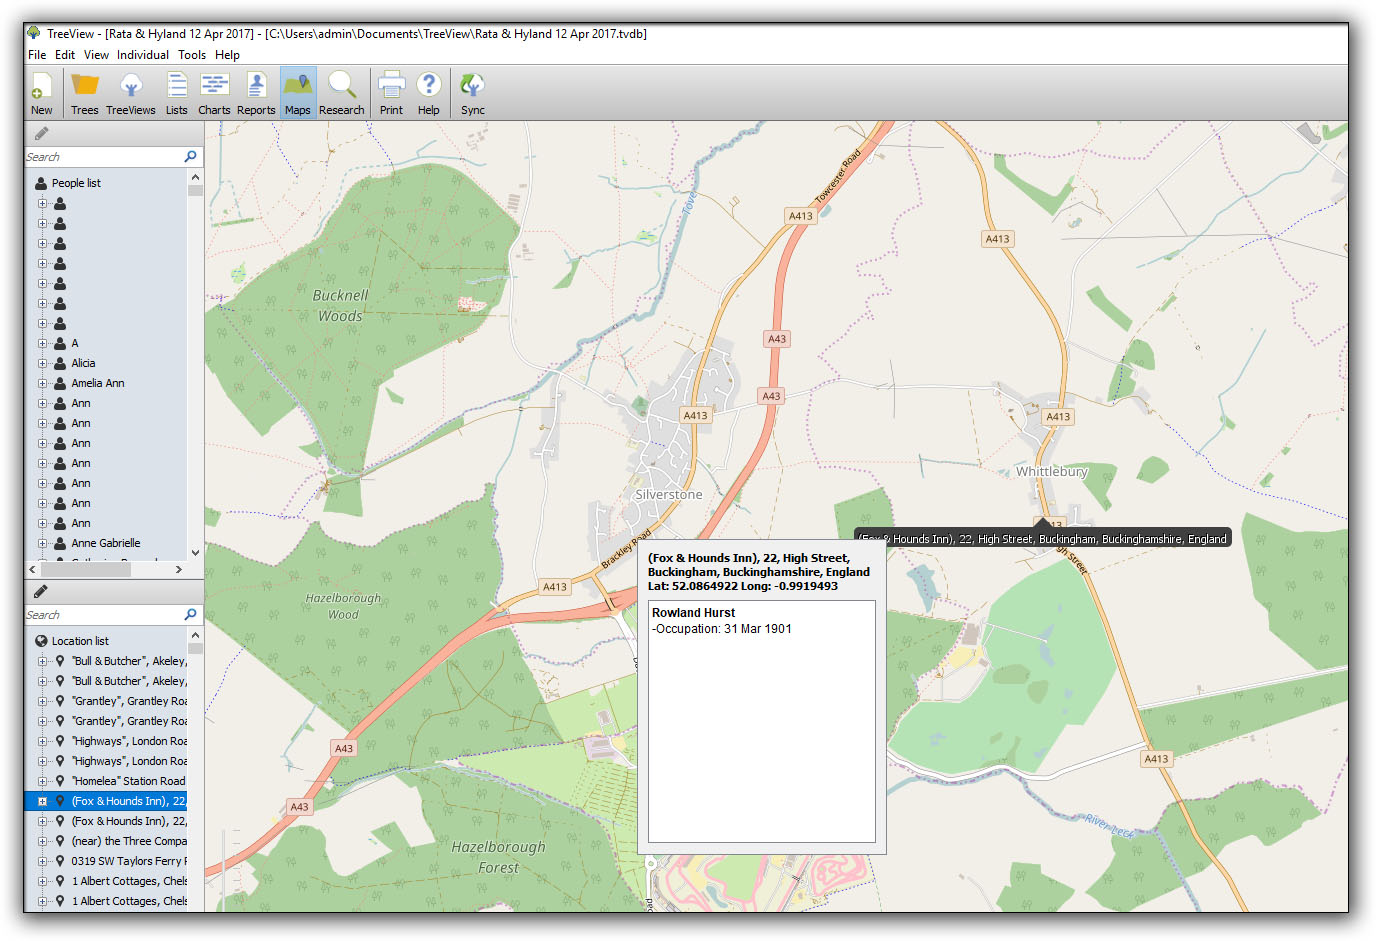 view of TreeView's map functions